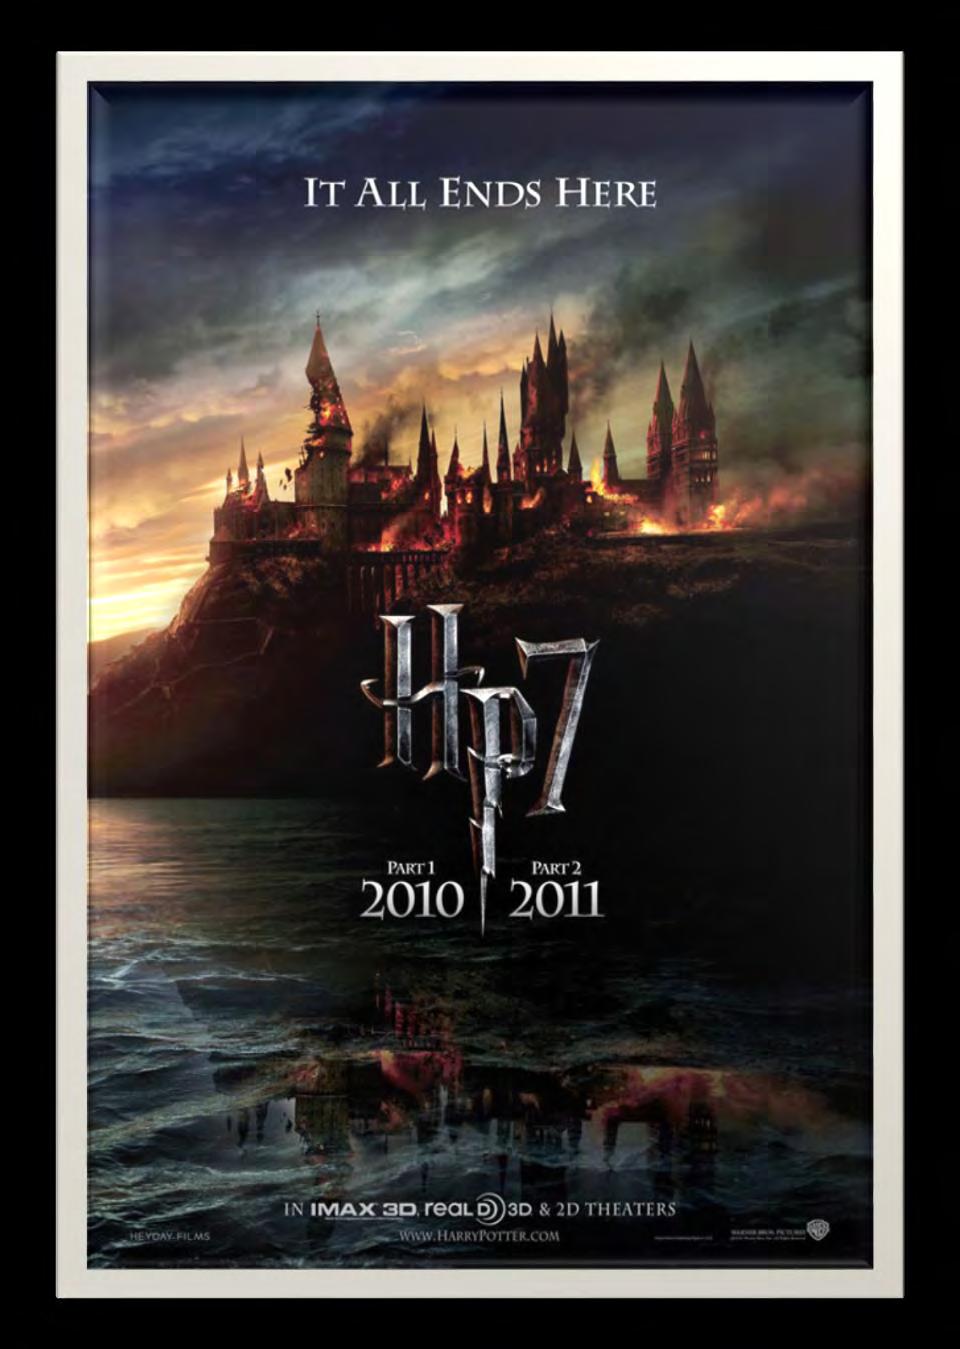 The Teaser Poster 2 This poster shows the destruction of Hogwarts, an established icon of the Harry Potter series.